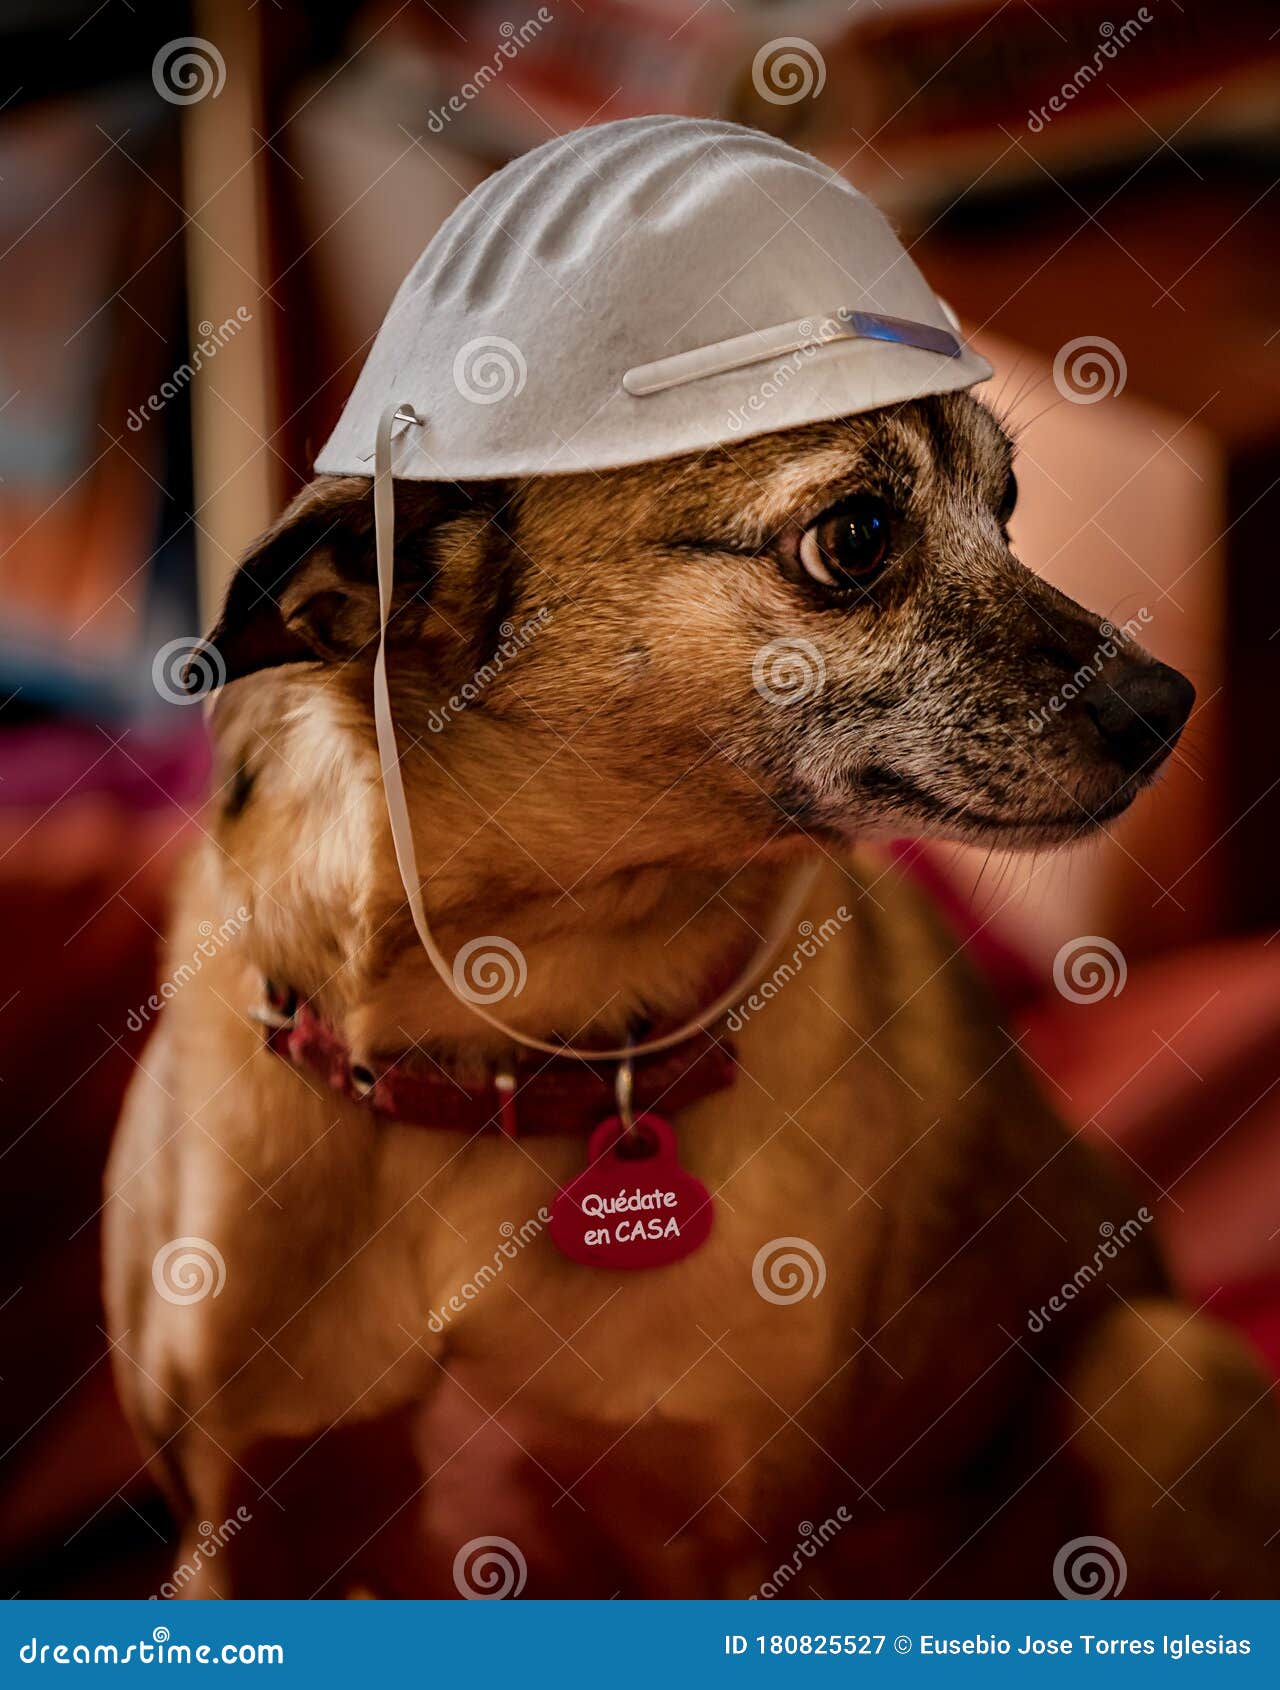 cute little dog with face mask and a plate with spanish words `quedate en casa` translation: stay at home